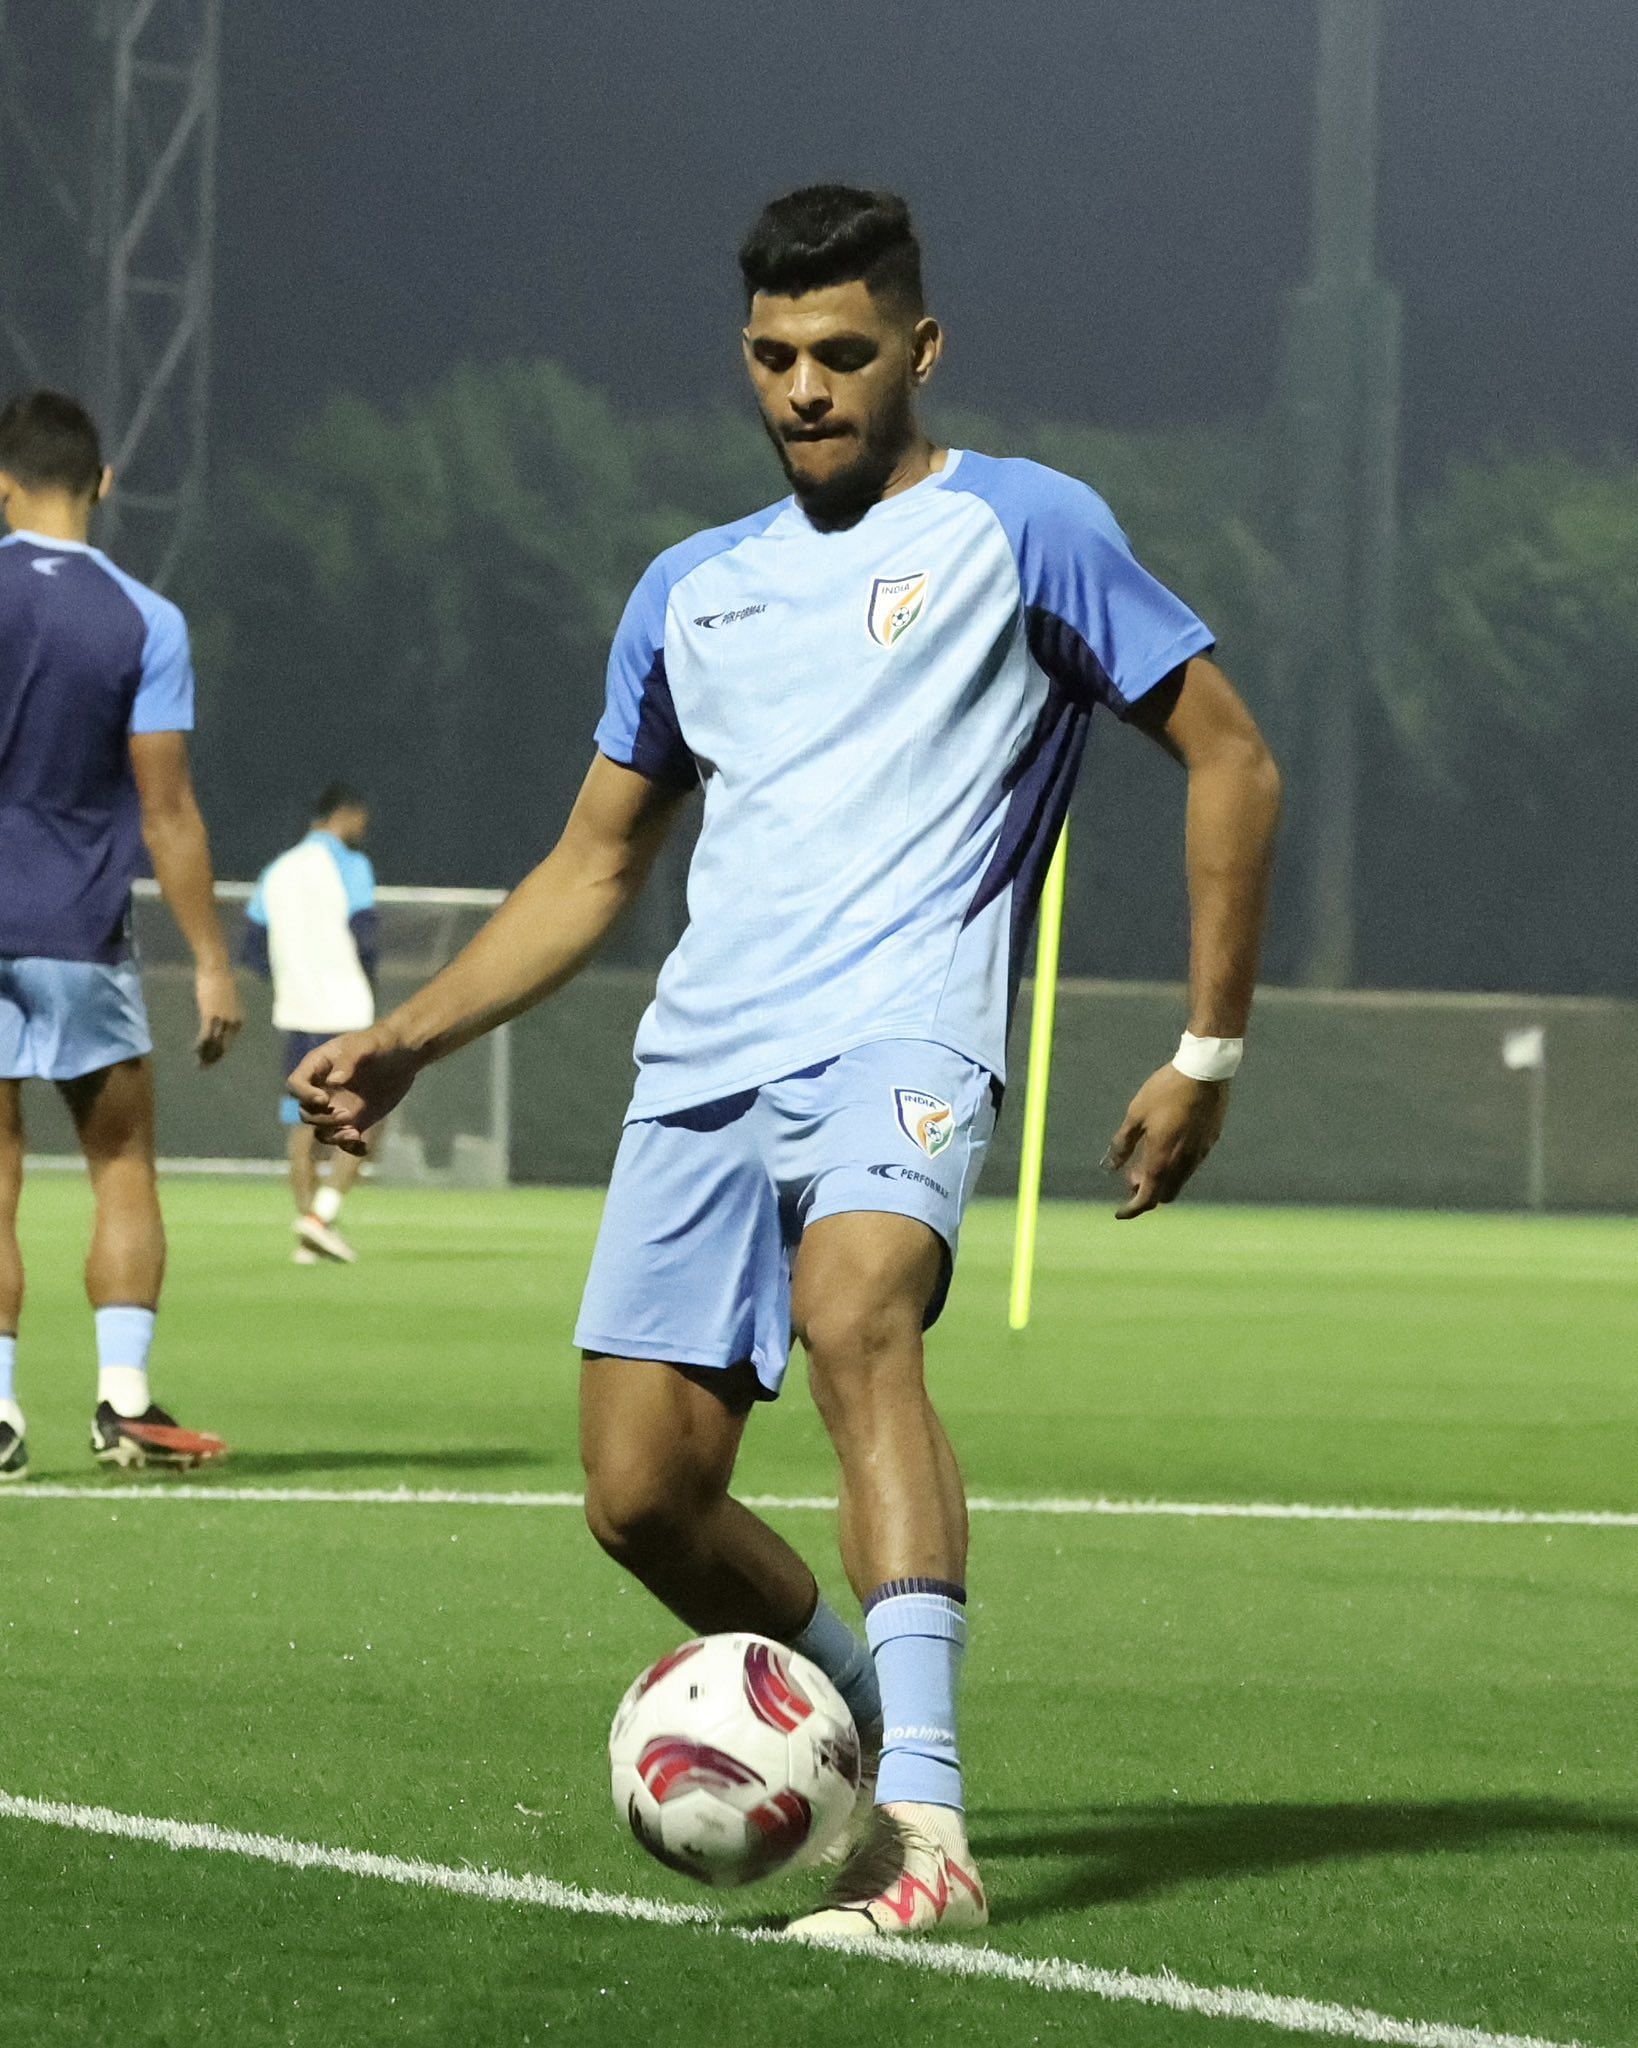 Mehtab said that he learnt a lot playing in the AFC Asian Cup. (MCFC Media)